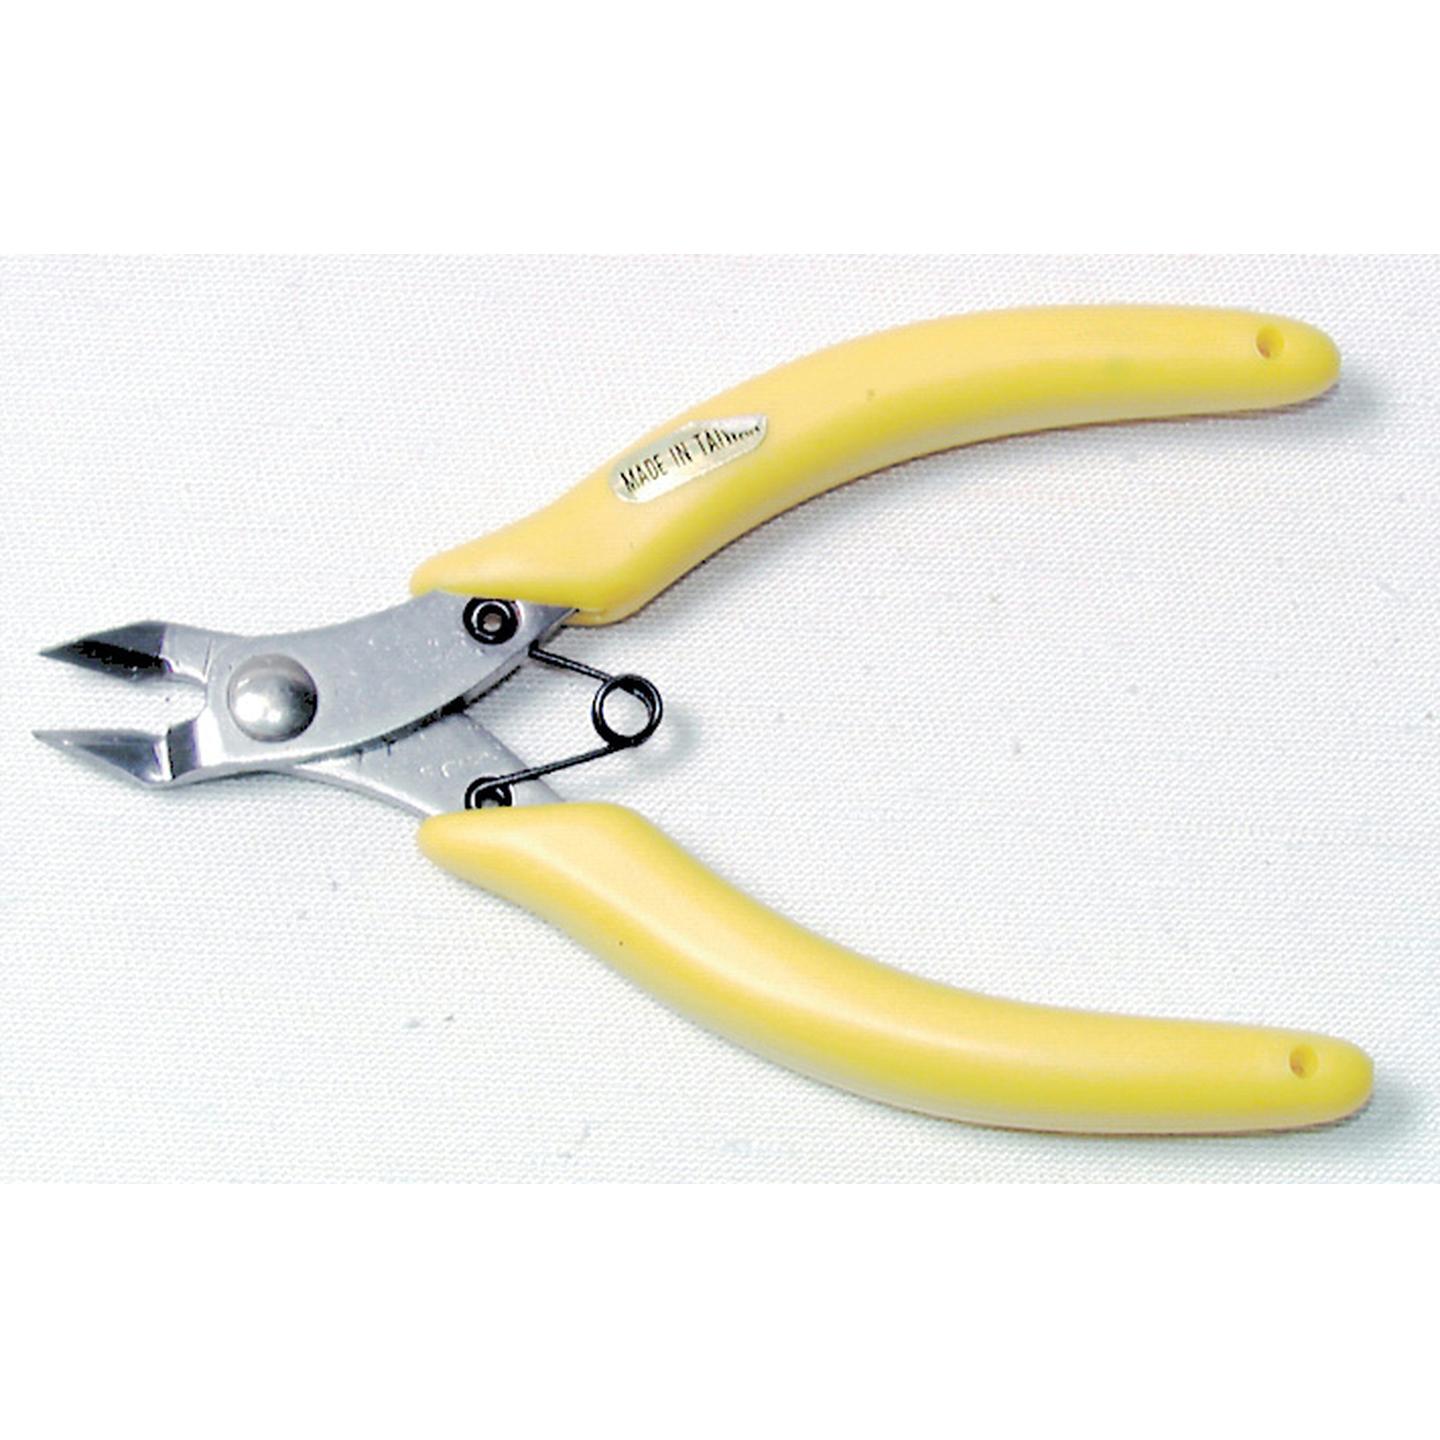 Stainless Steel Side Cutters